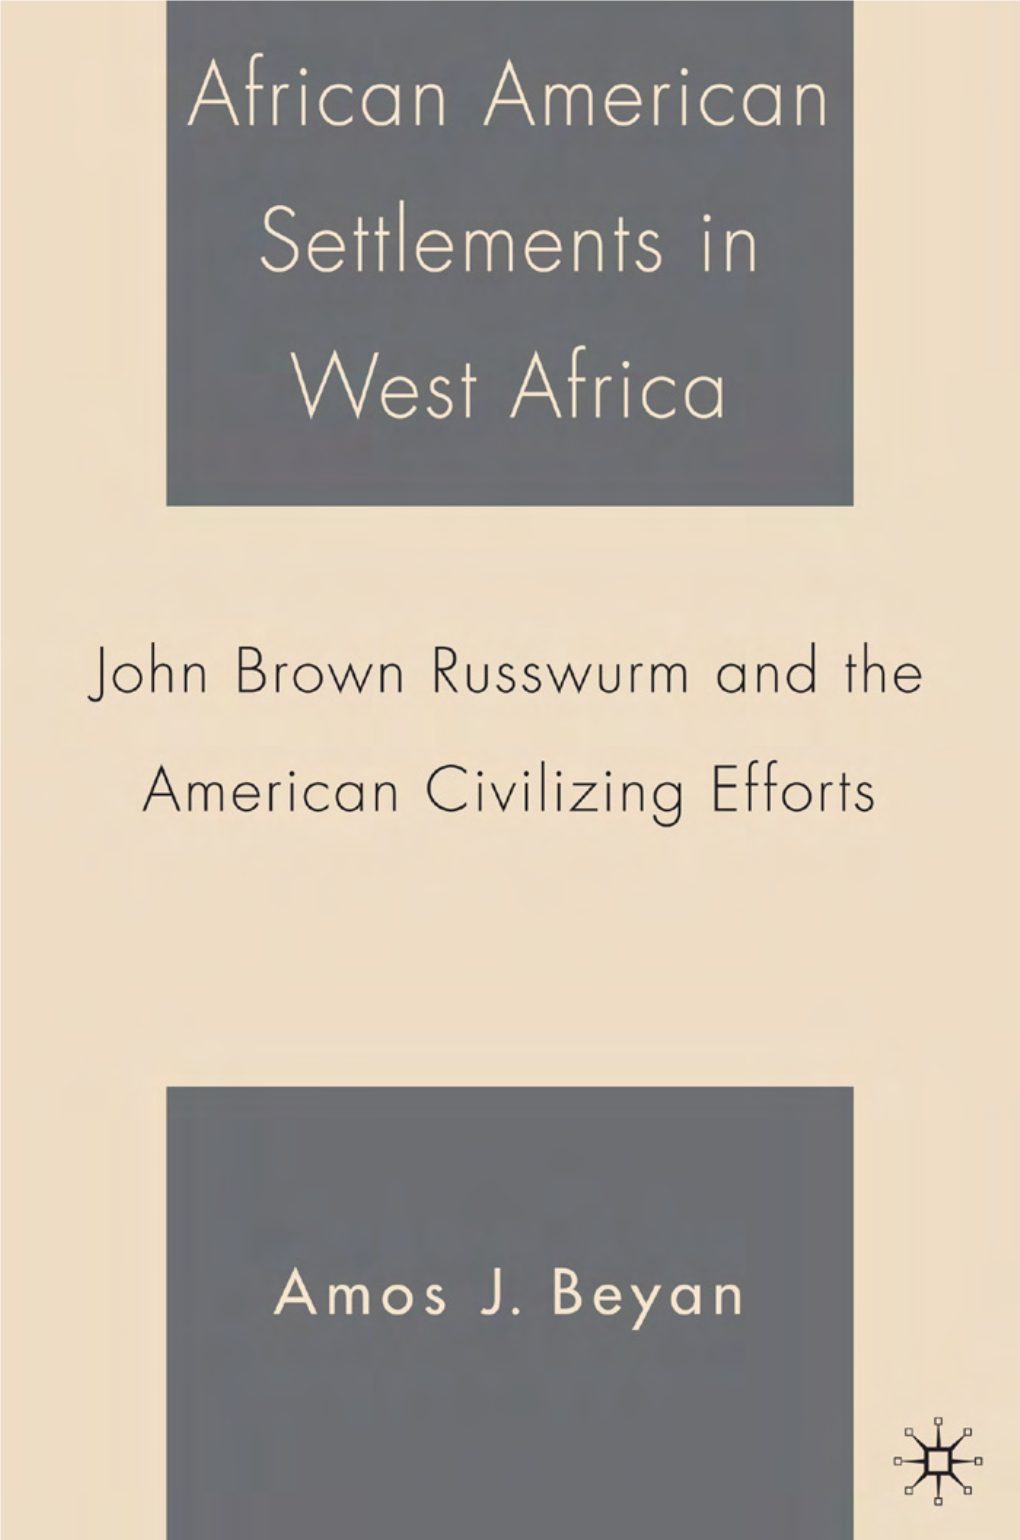 African American Settlements in West Africa John Brown Russwurm and the American Civilizing Efforts